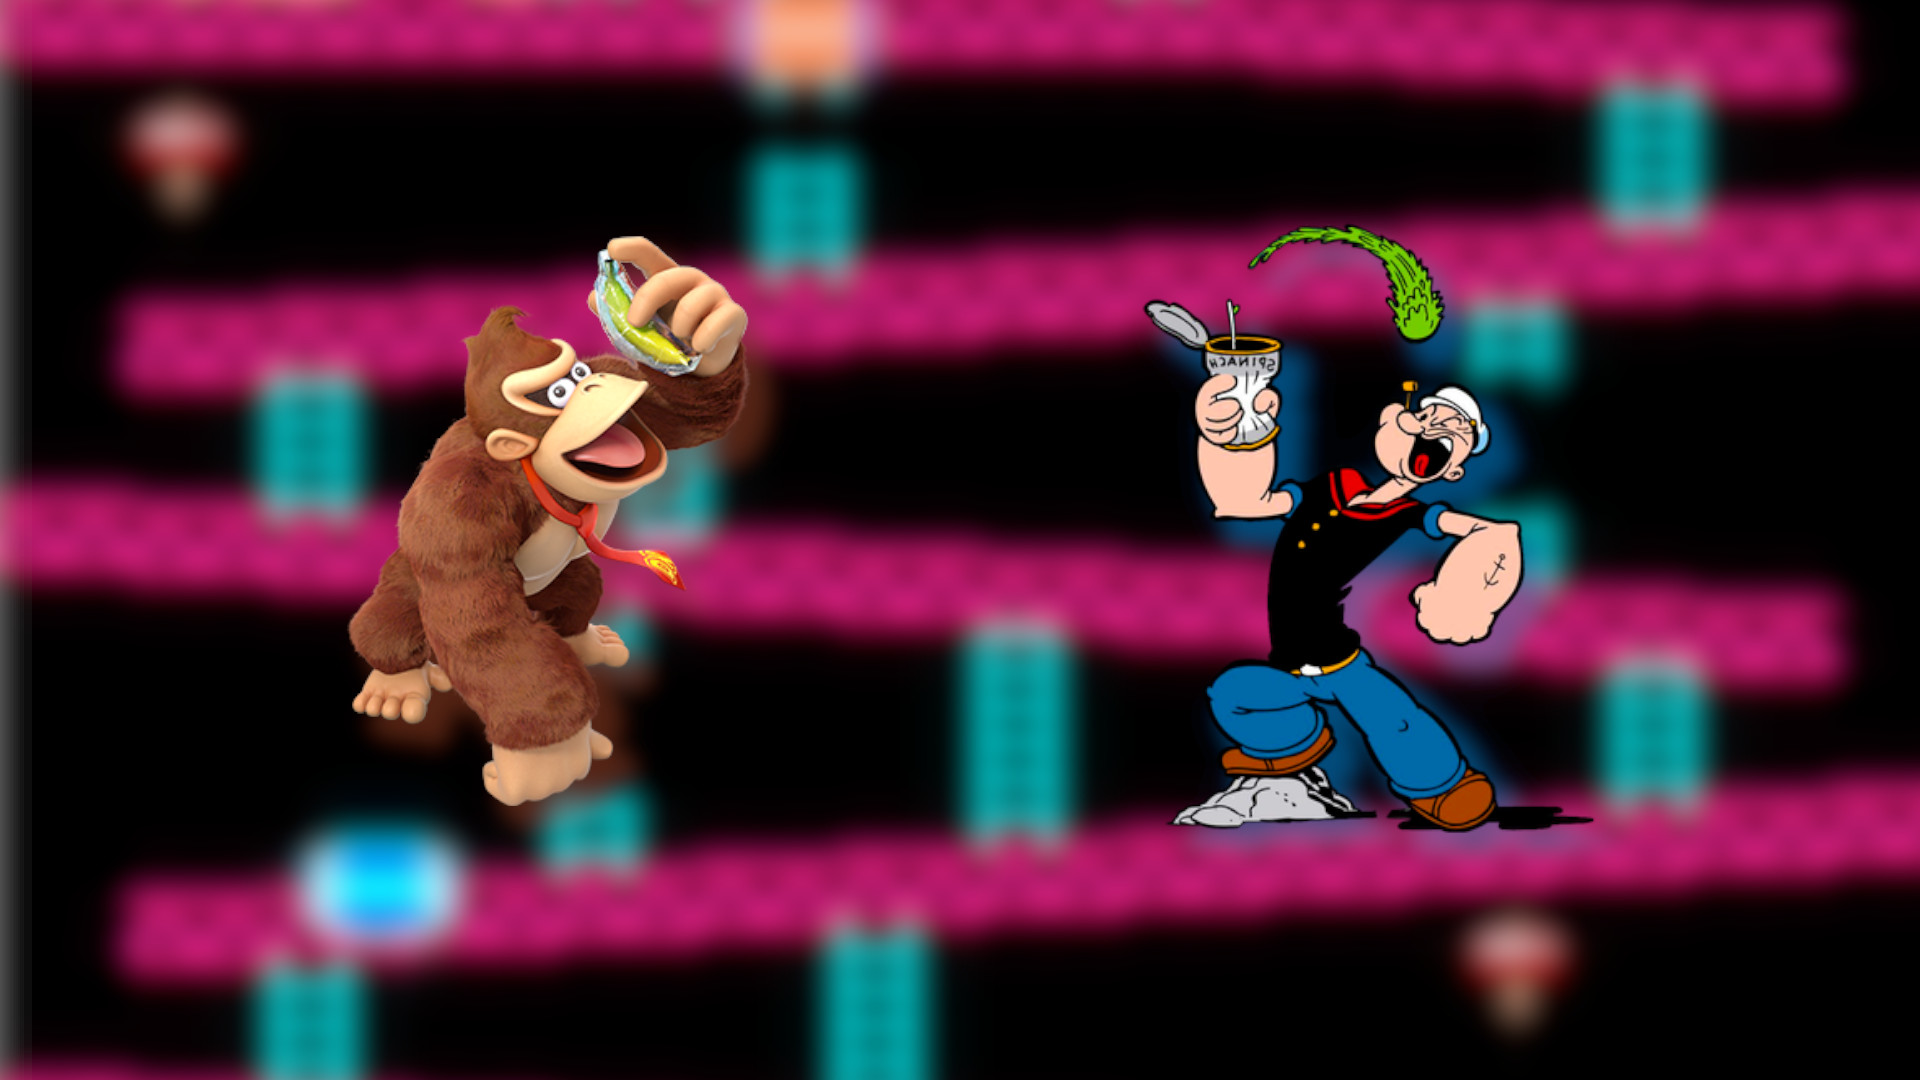 Well, blow me down! Donkey Kong was almost a Popeye game